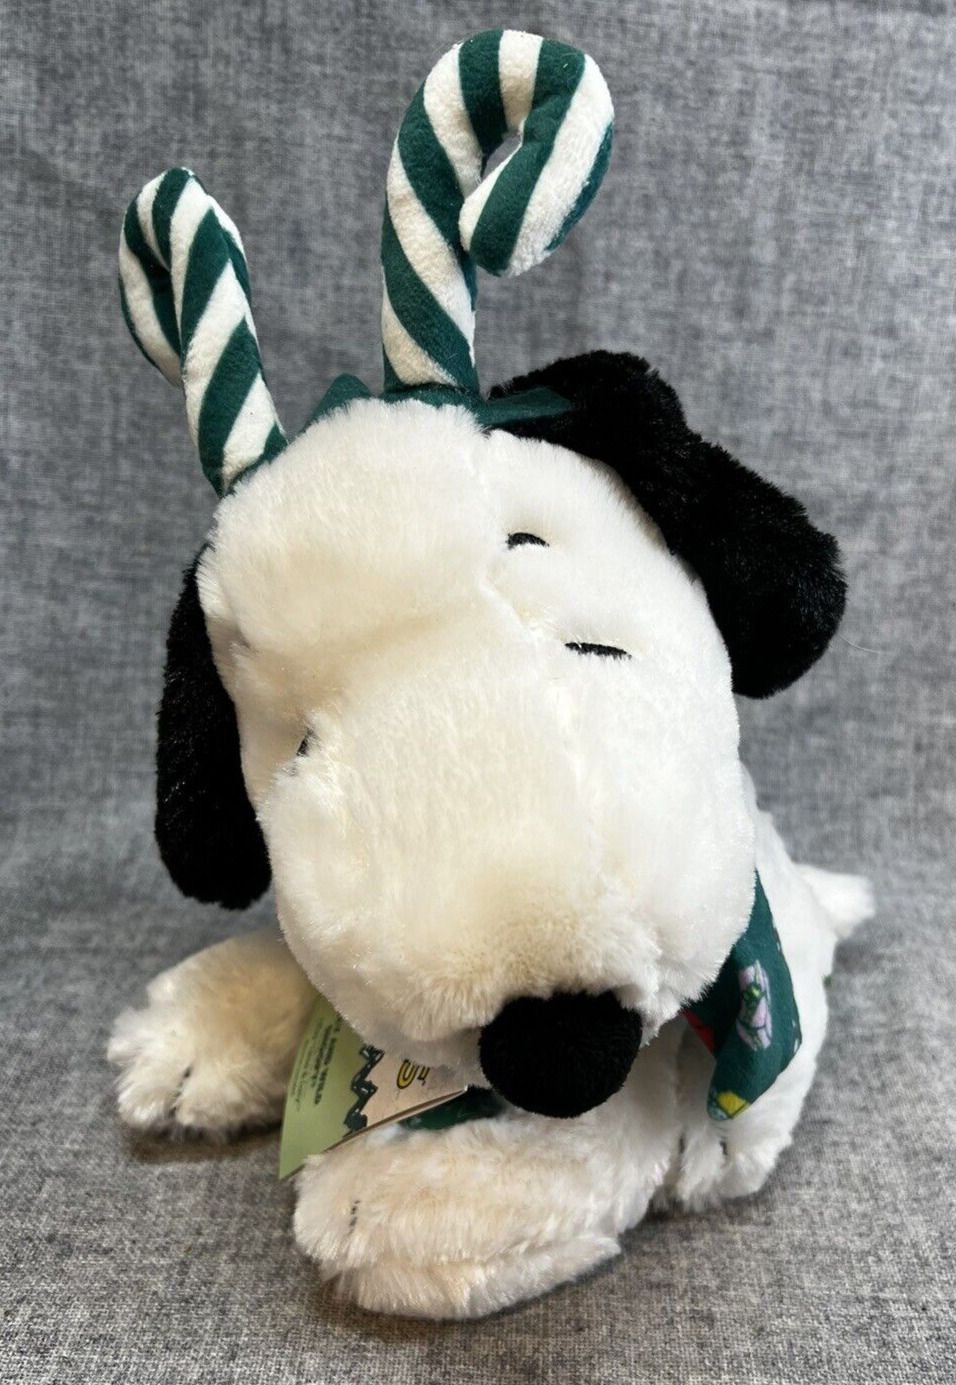 DanDee Dancing Plush SILLY & WILD SNOOPY PEANUTS - 2021 New With Tags NWT